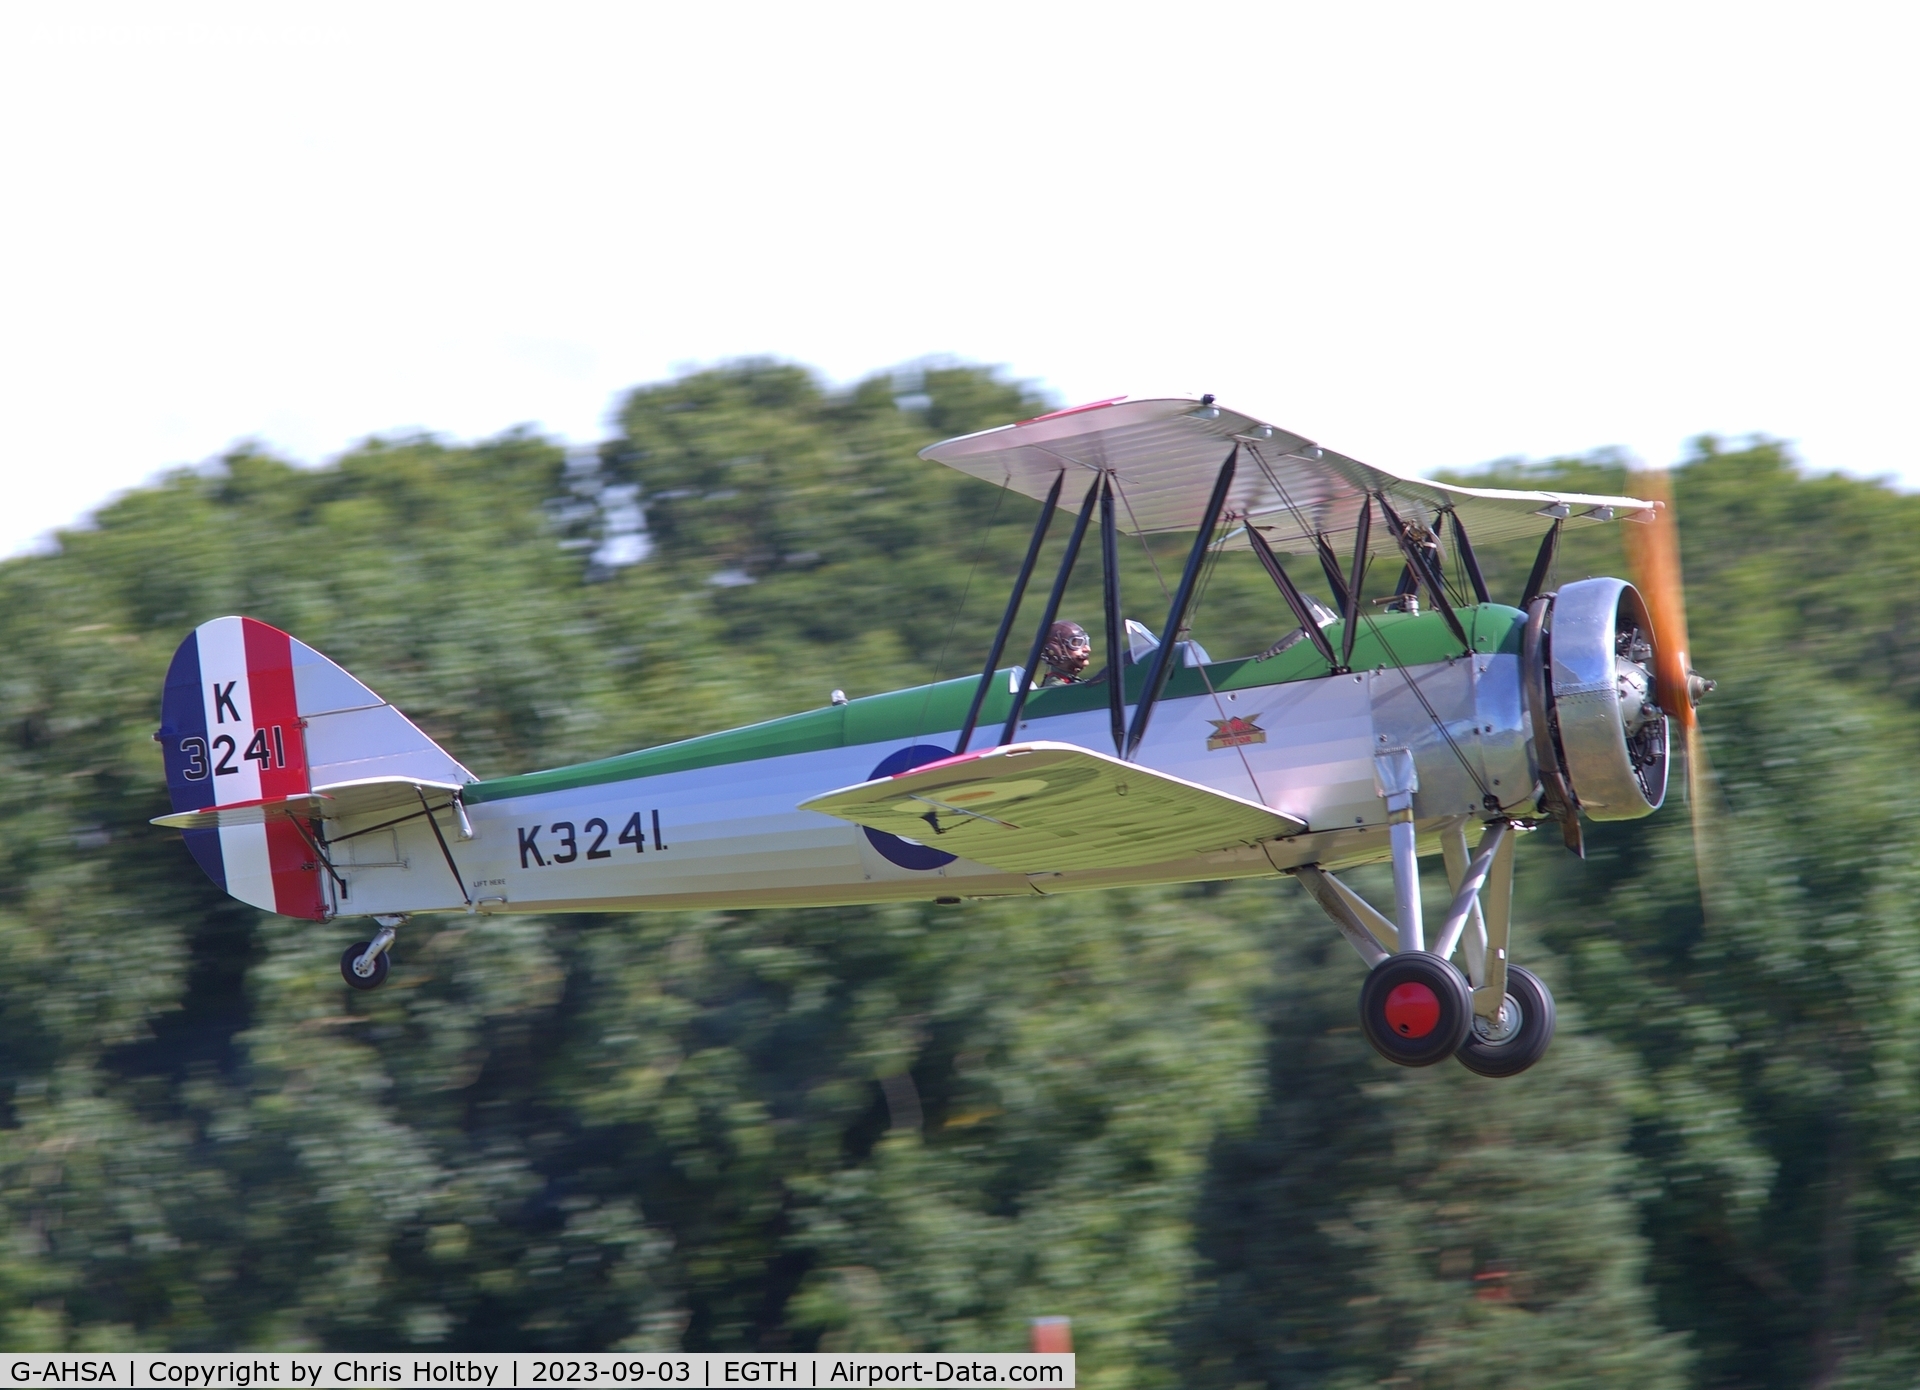 G-AHSA, 1933 Avro 621 Tutor C/N K3215, Taking off from Old Warden on Vintage Airshow day 2023